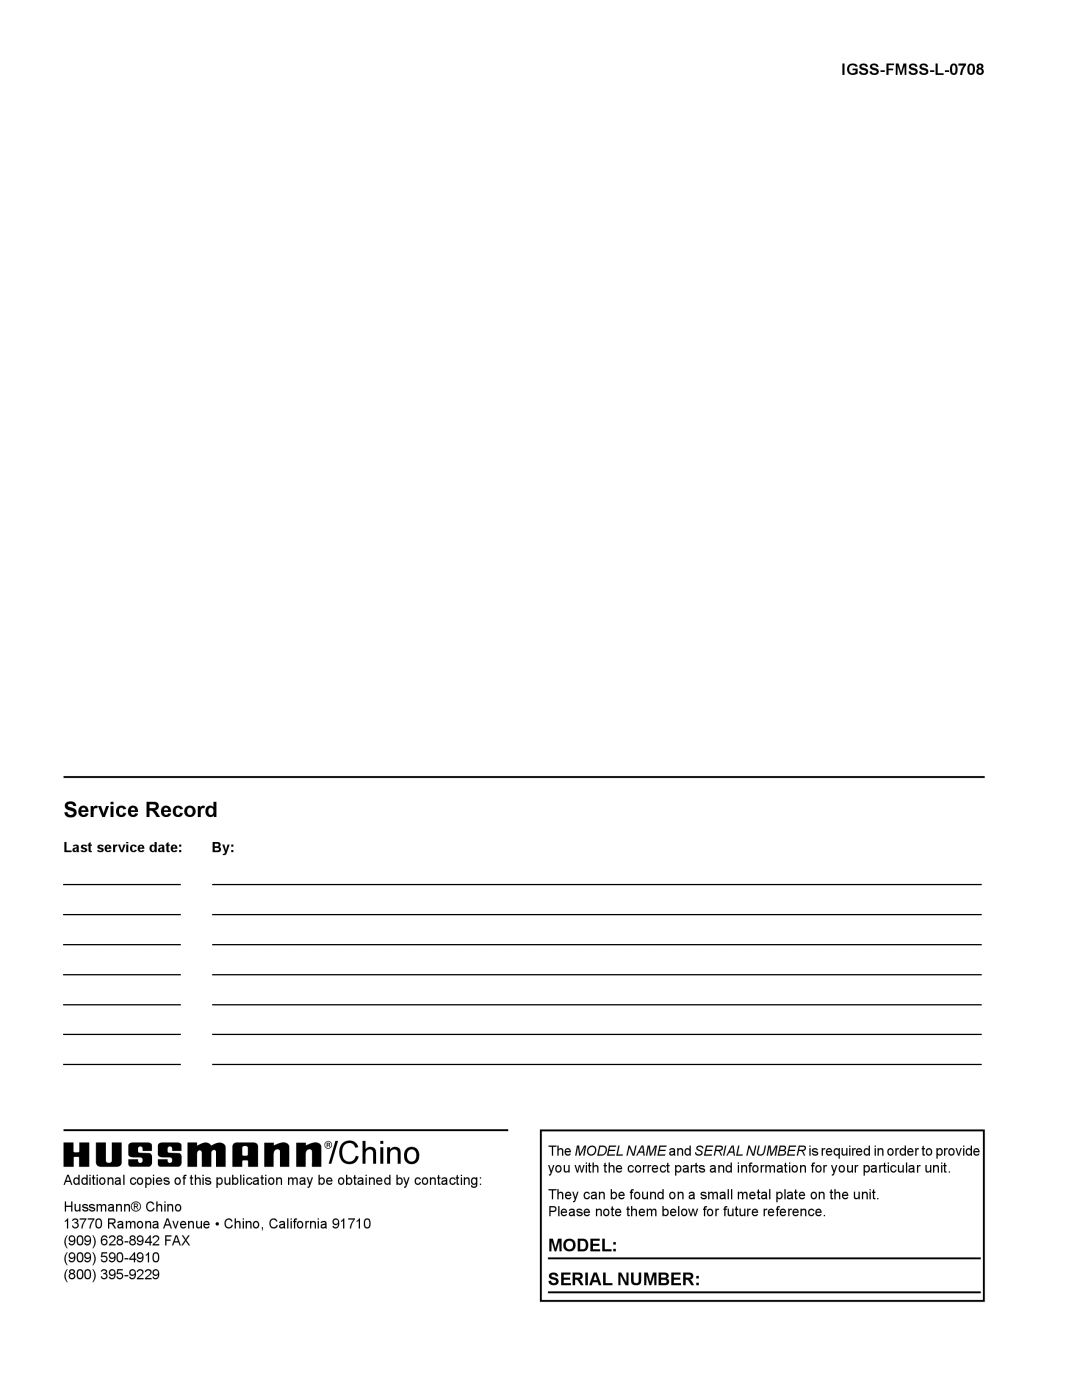 hussman operation manual Chino, Service Record, Model Serial Number, IGSS-FMSS-L-0708, Last service date 